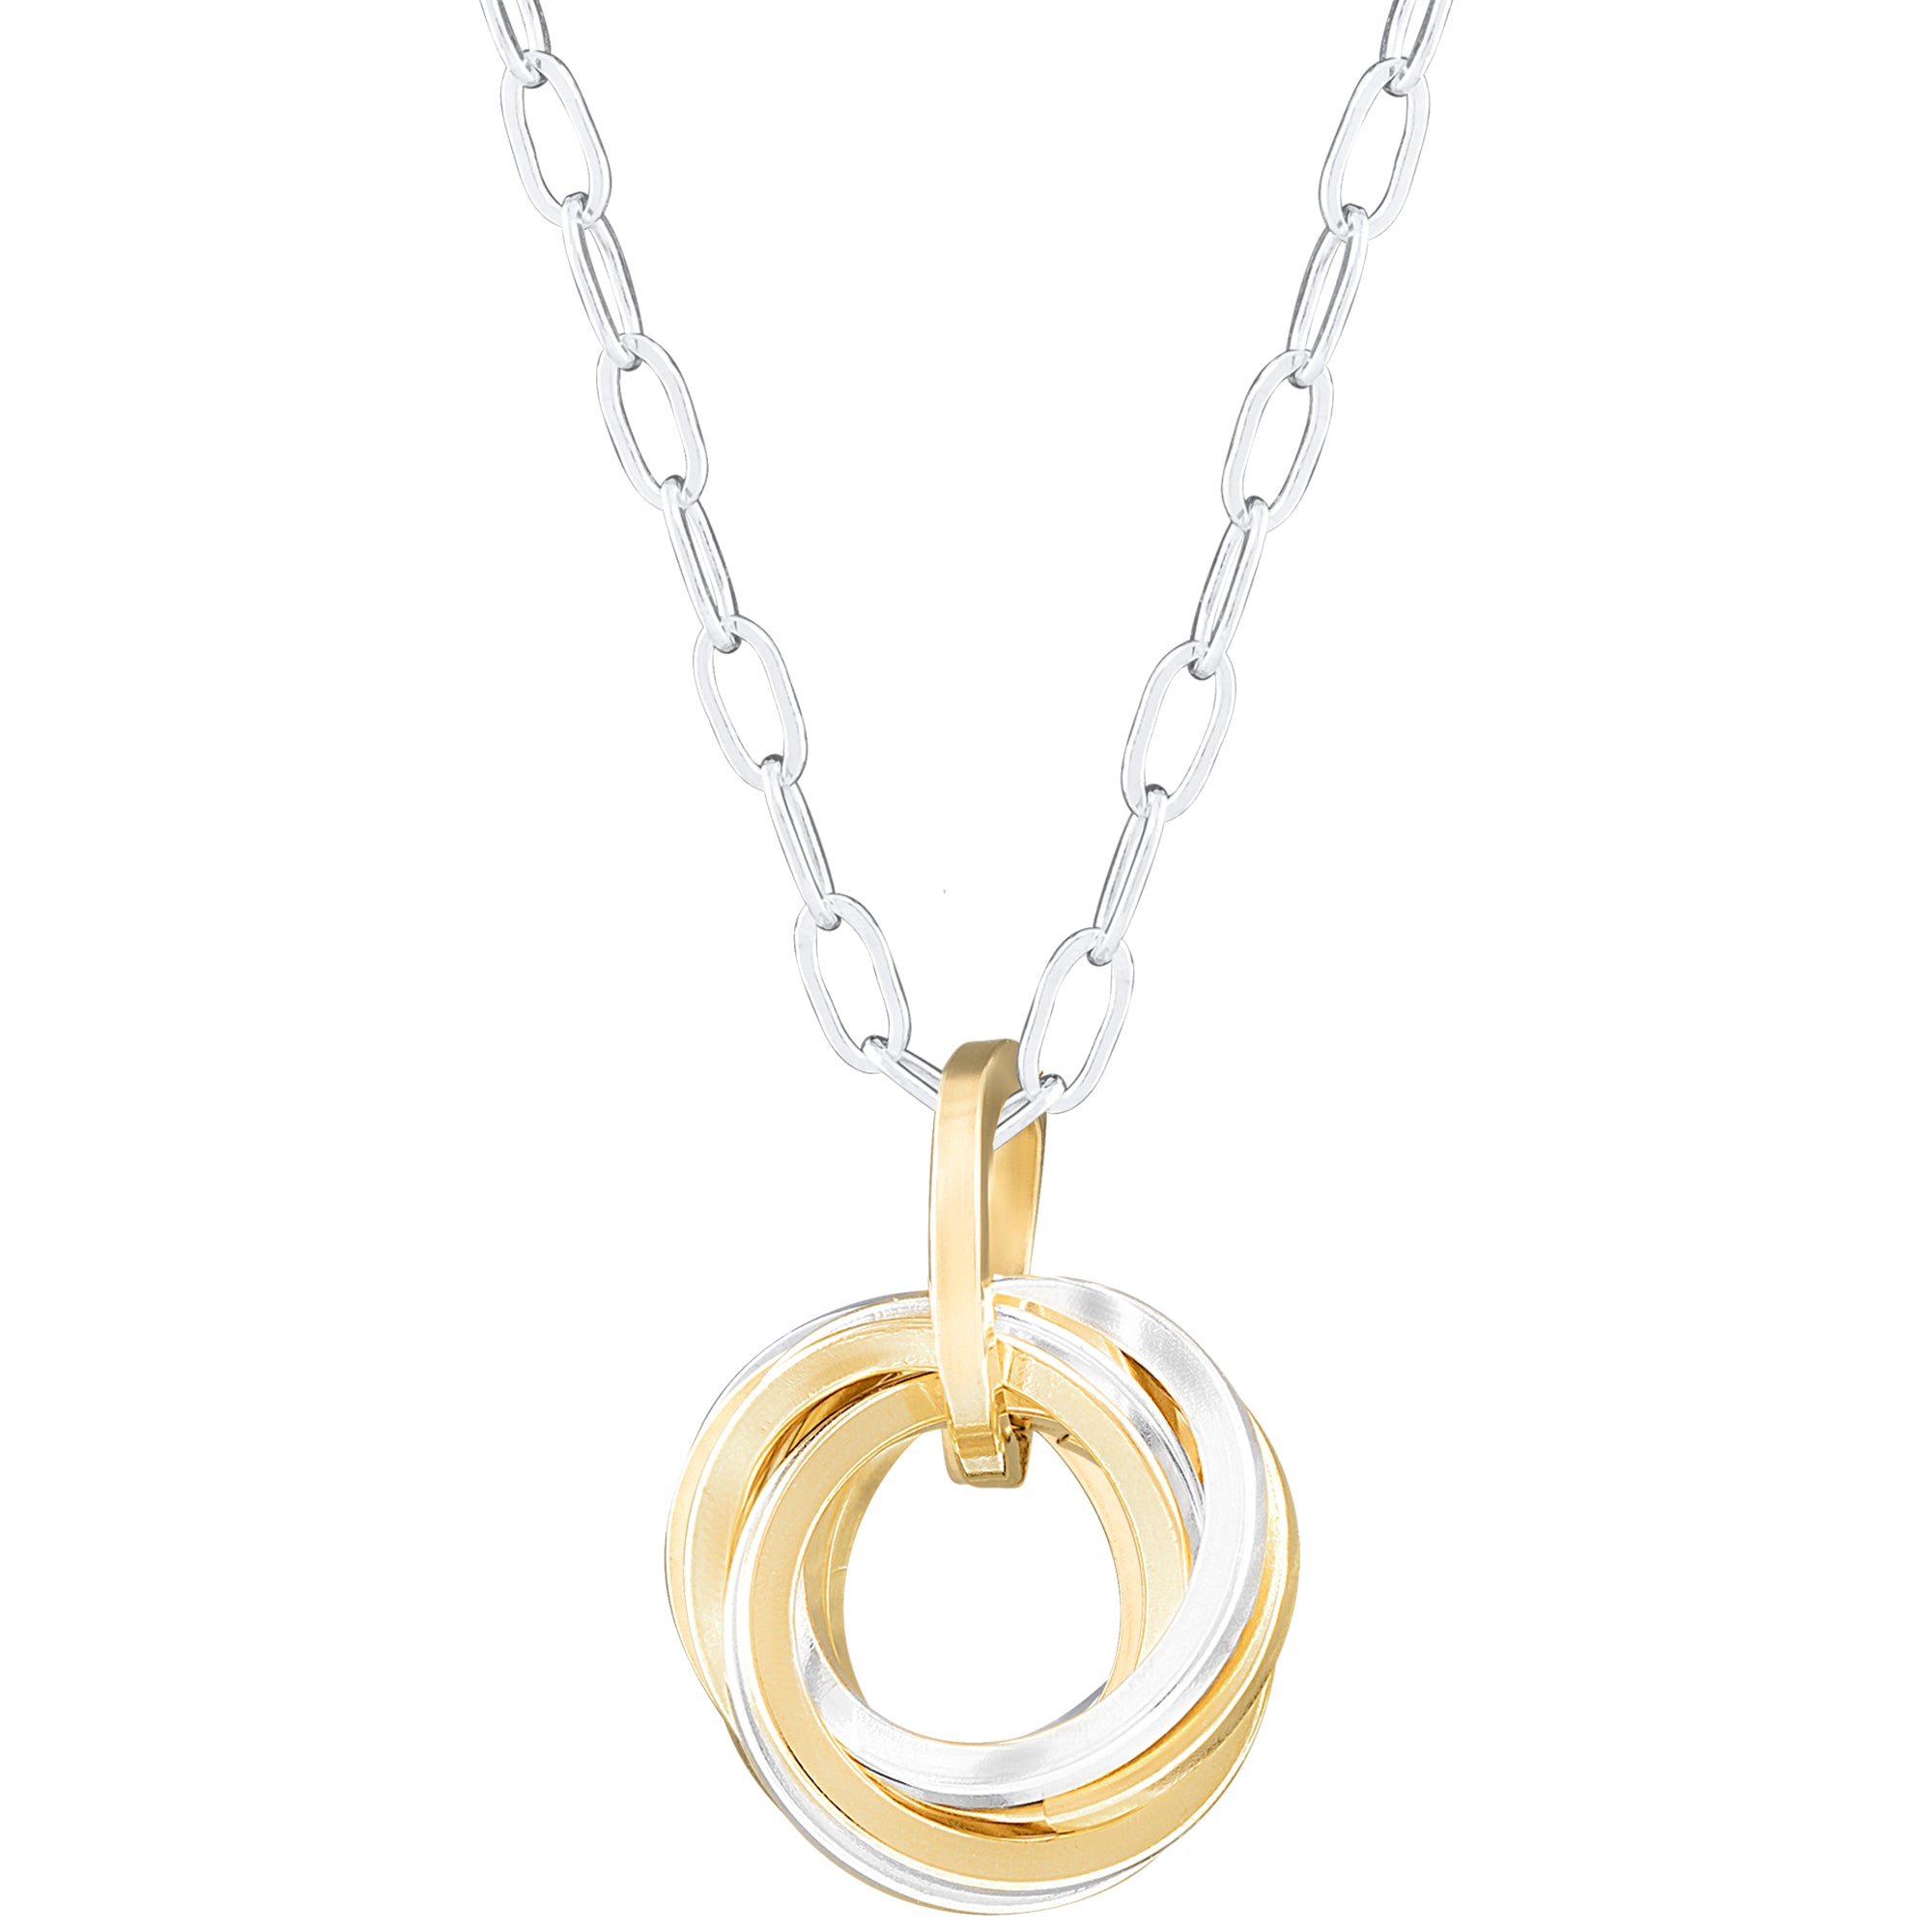 Two Tone Classic Love Knot Pendant Necklace in Sterling Silver and 14K Yellow Gold Fill - 18" or 20" Chain Included